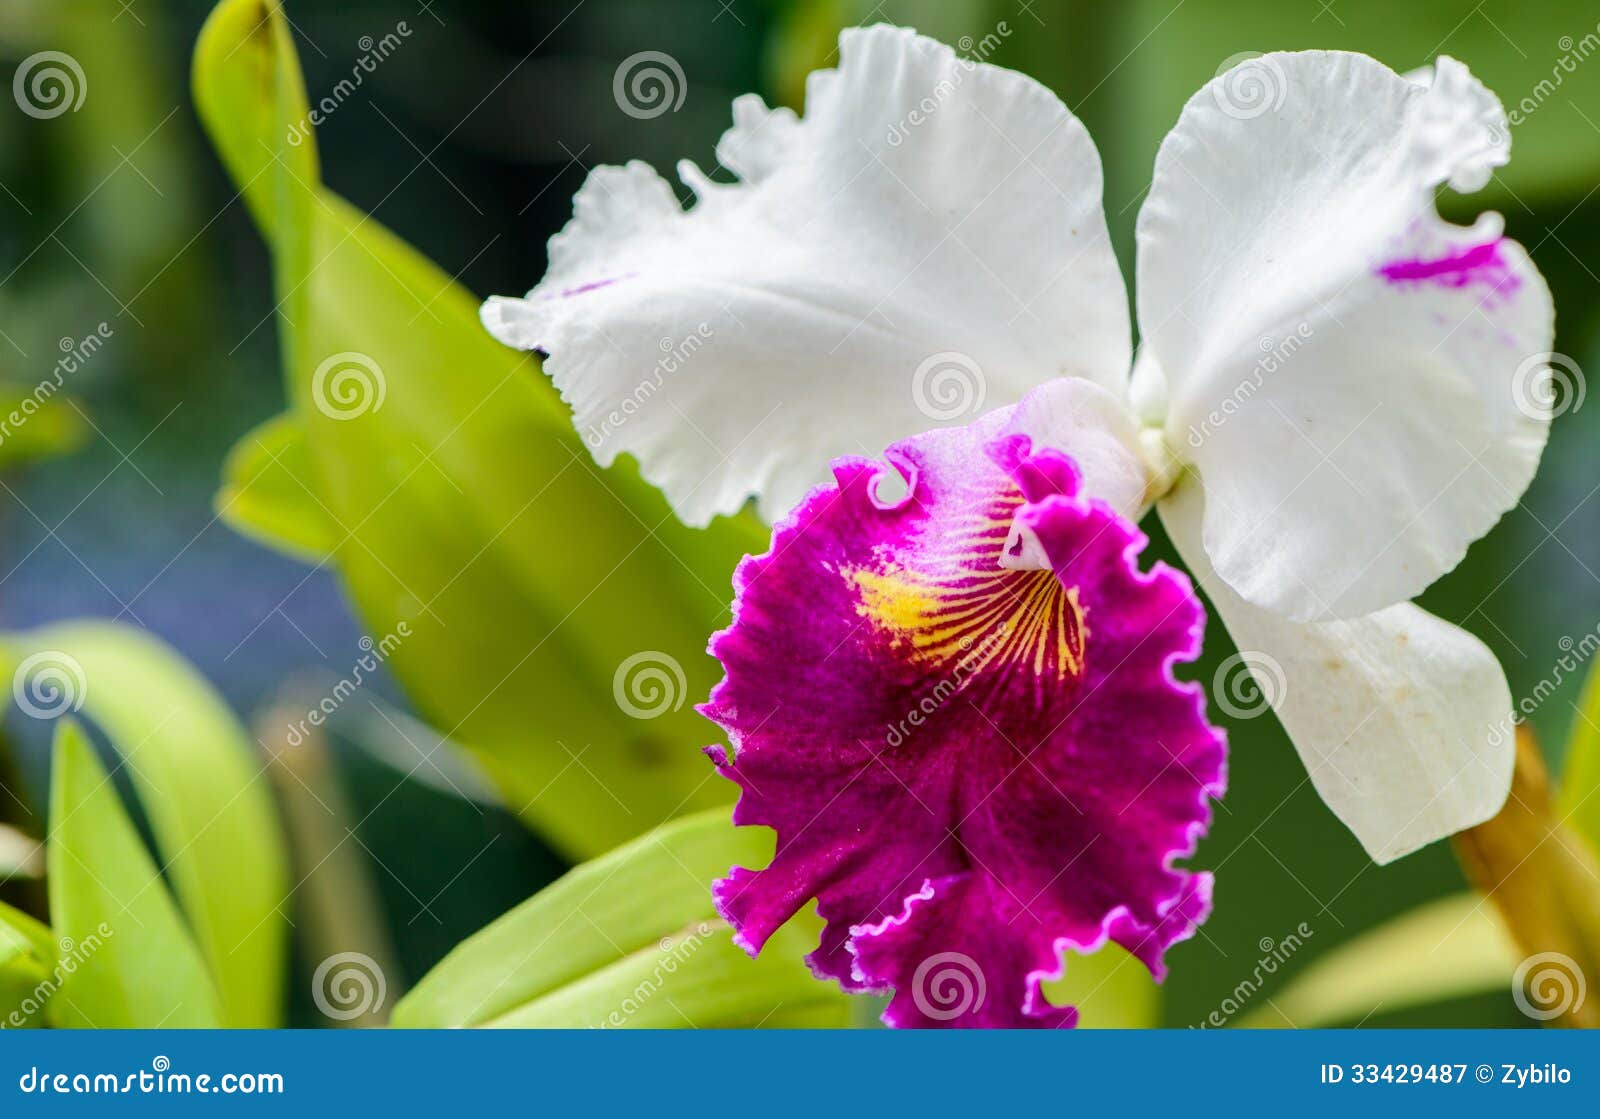 Types Of Orchids